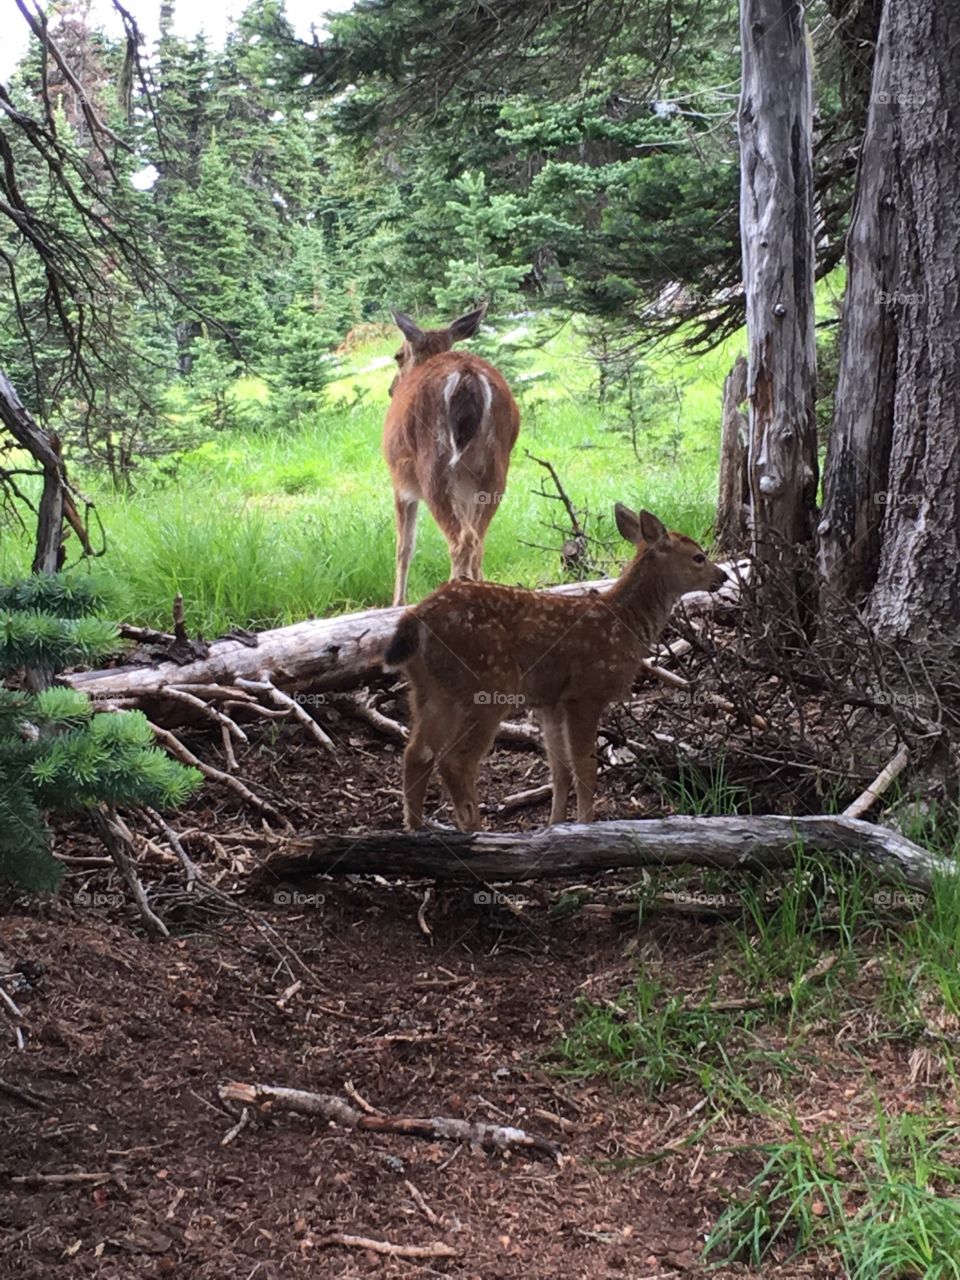 A fawn takes a peek before following its mother
